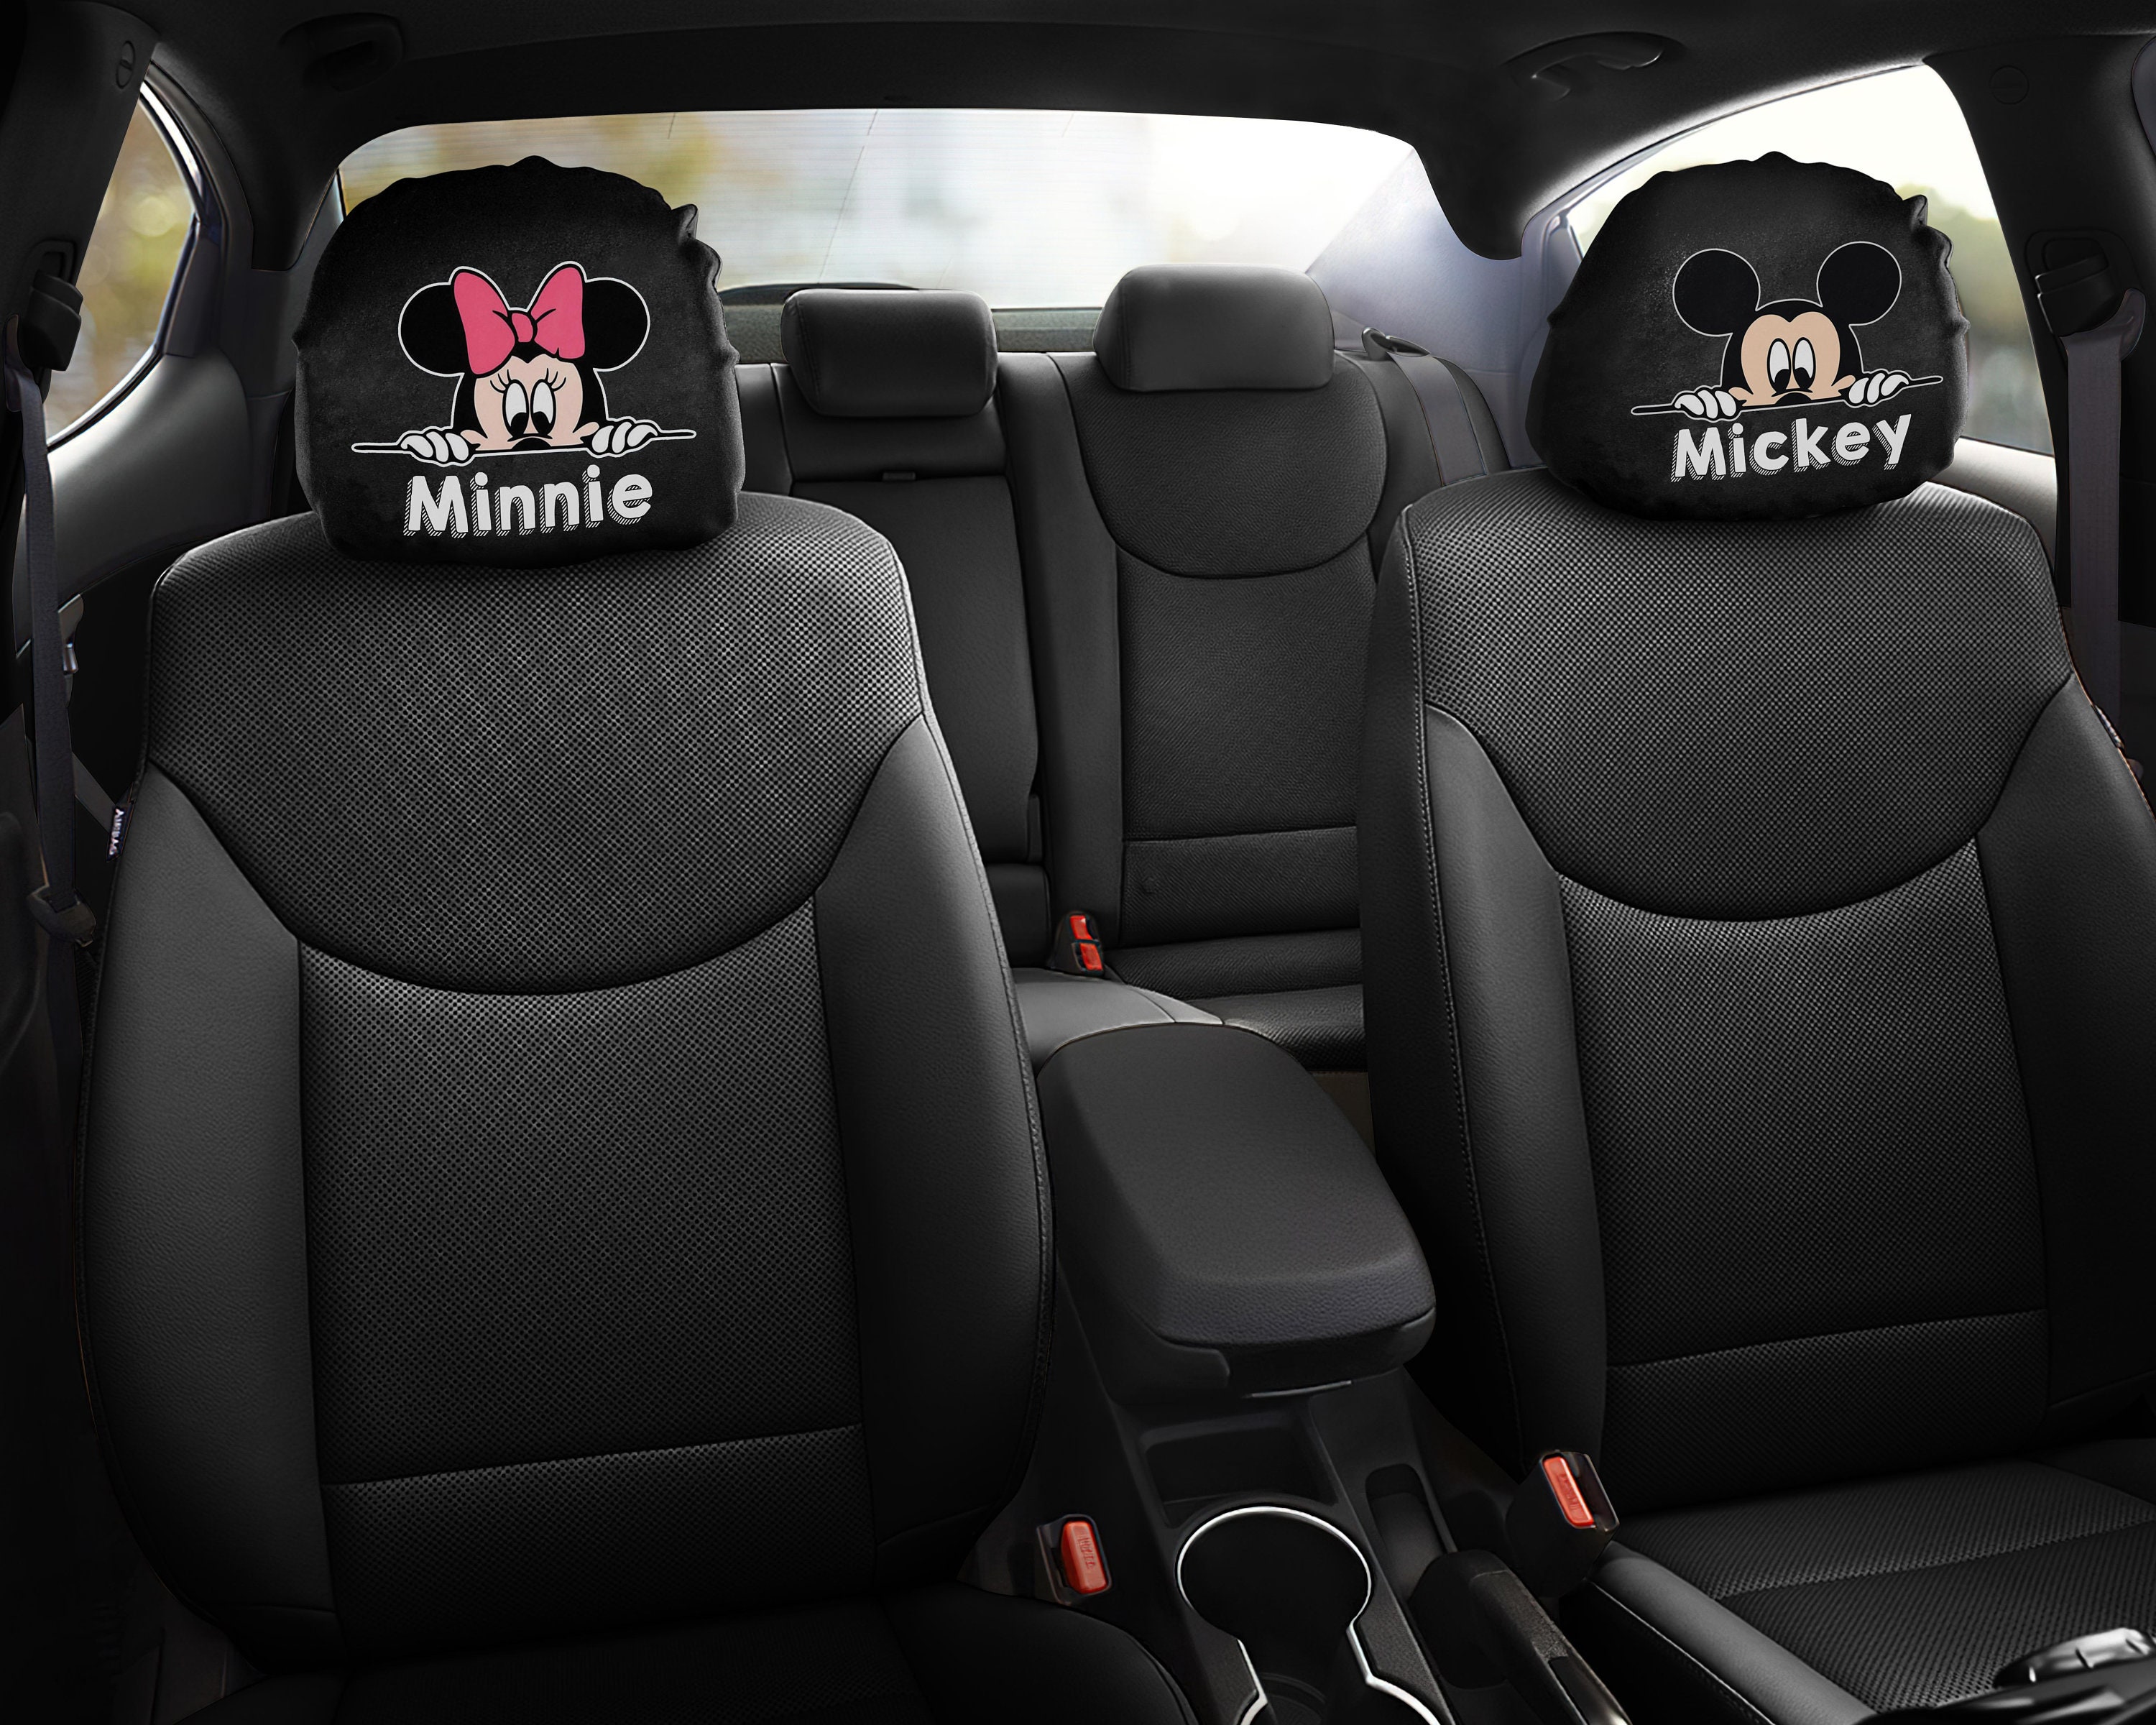 Father's Day Gift, Car Decor Headrest Covers, Mickey Minnie - Disney Land Lover Gift Set 2 Headrest Cover, Gift For Mom Car Accessories